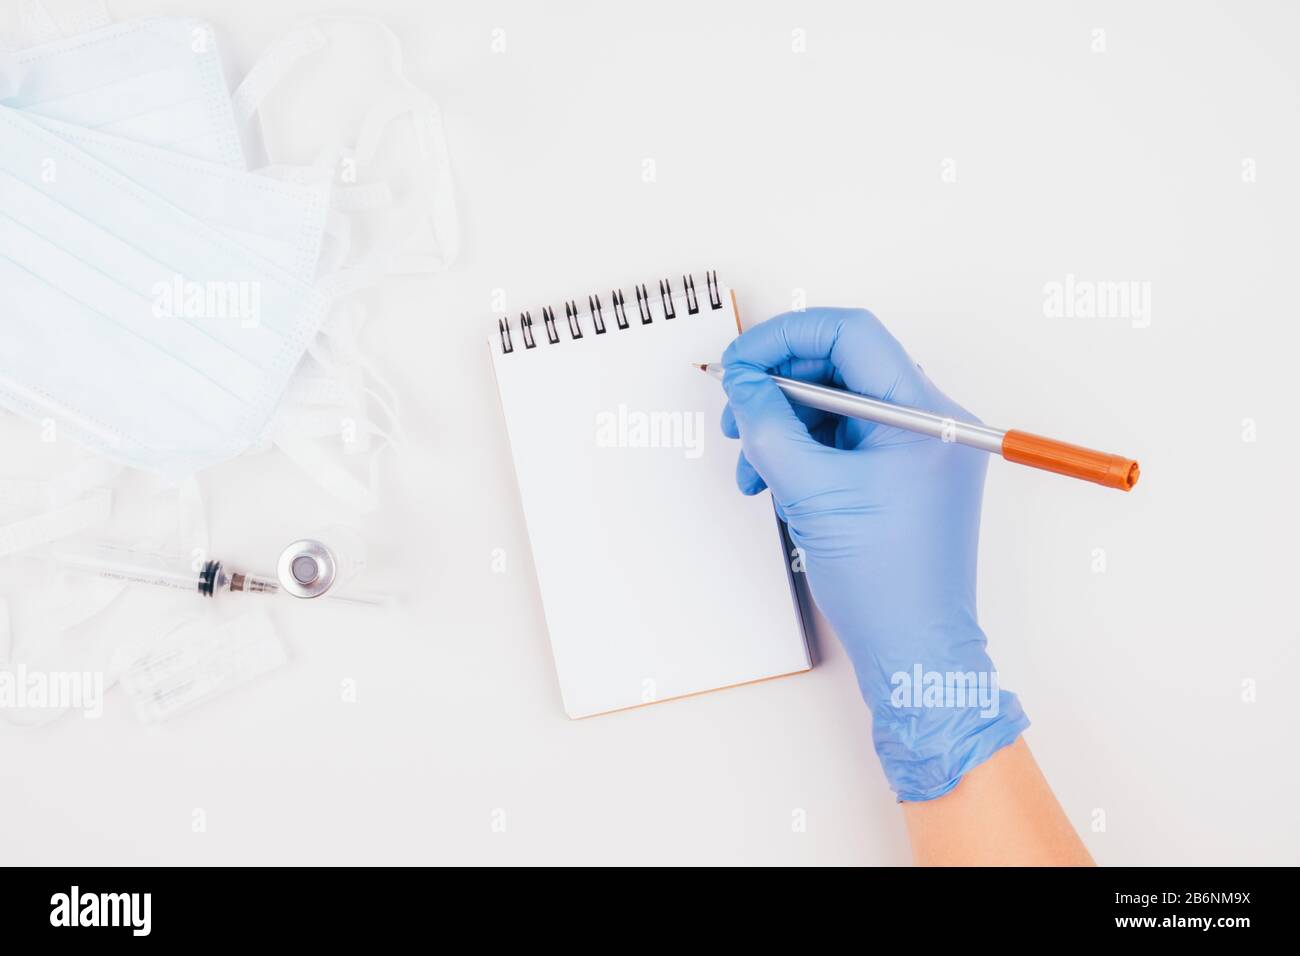 A gloved hand, medications, a syringe, and masks. Stock Photo